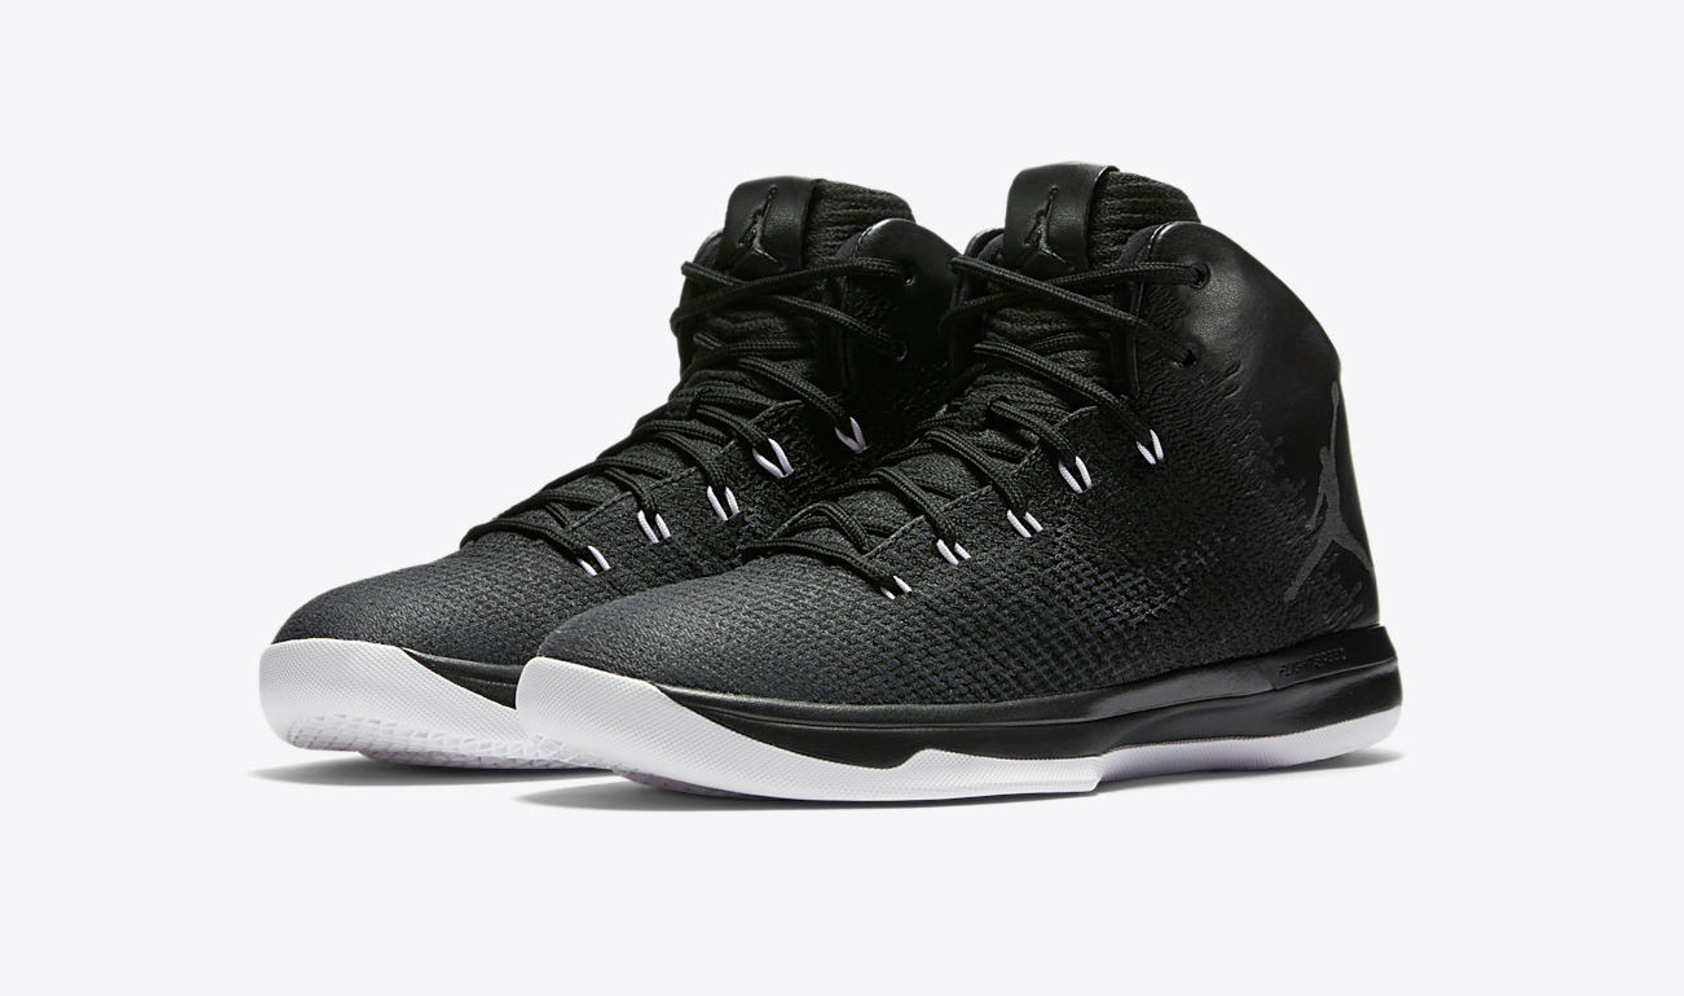 The Air Jordan XXXI 'Black Cat' is Available Now - WearTesters